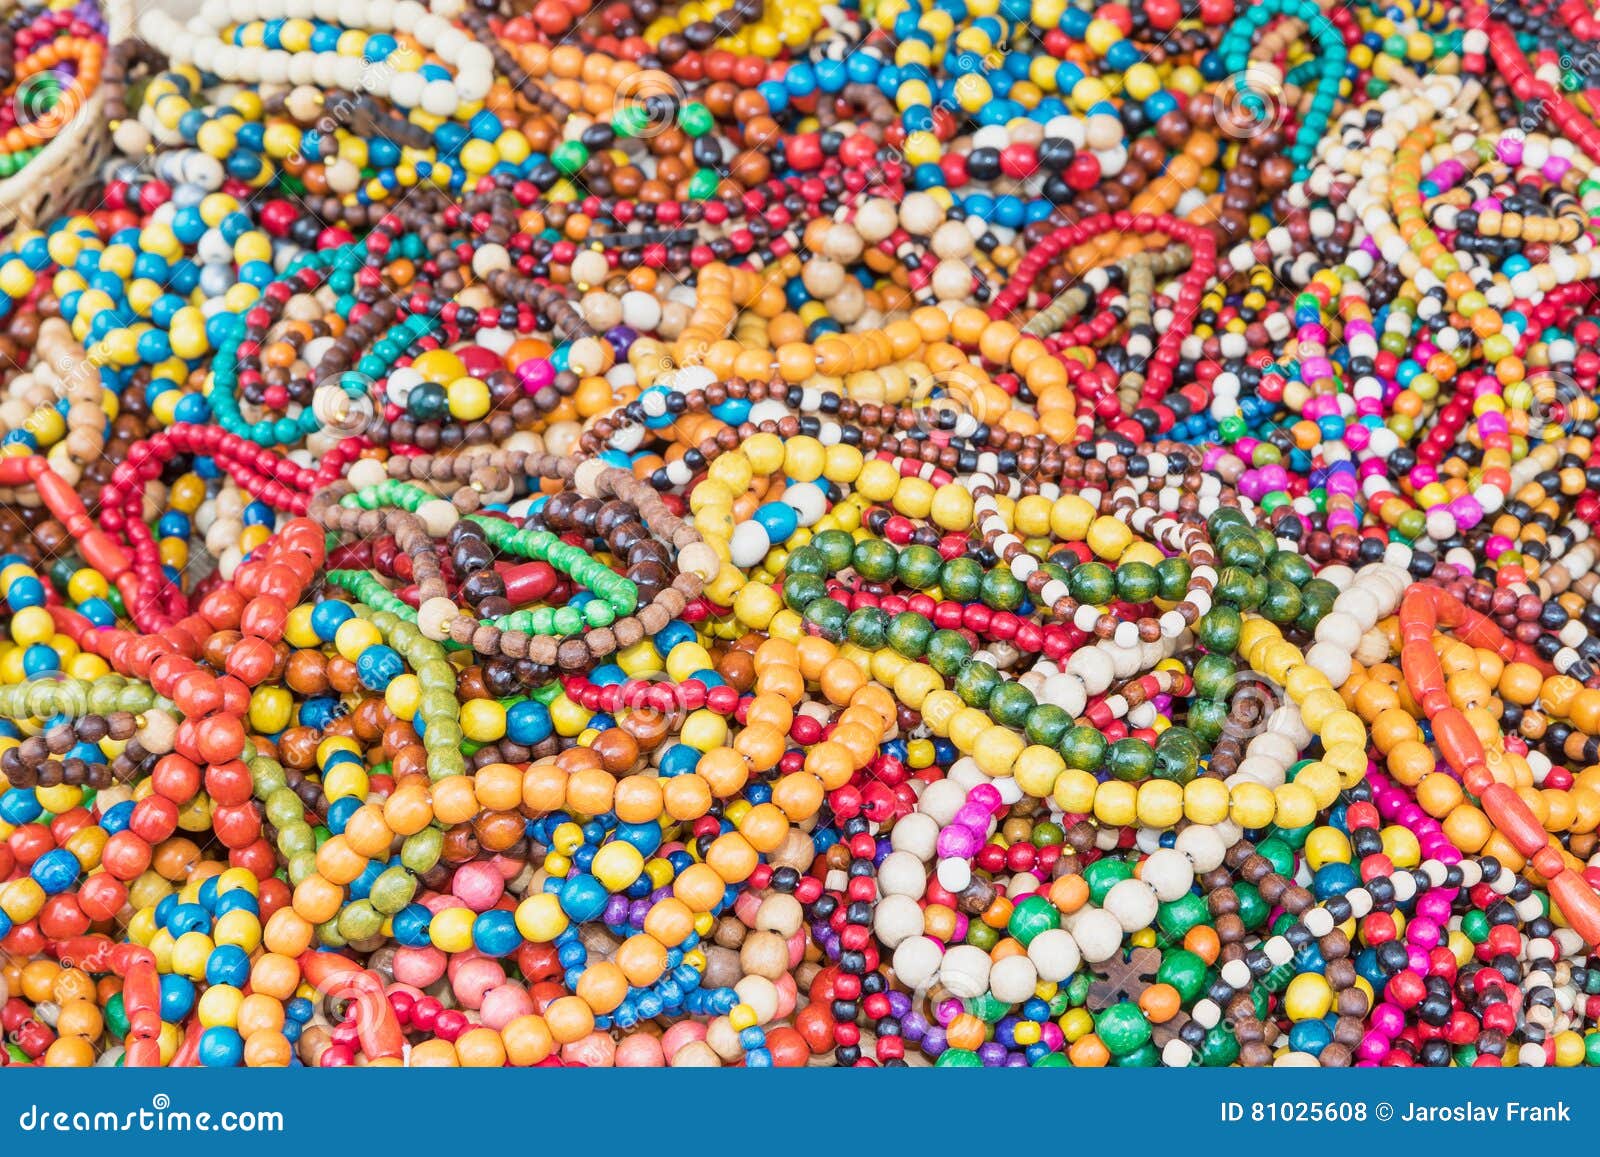 The Pile of Multicolored Wooden Necklaces Stock Photo - Image of brown ...